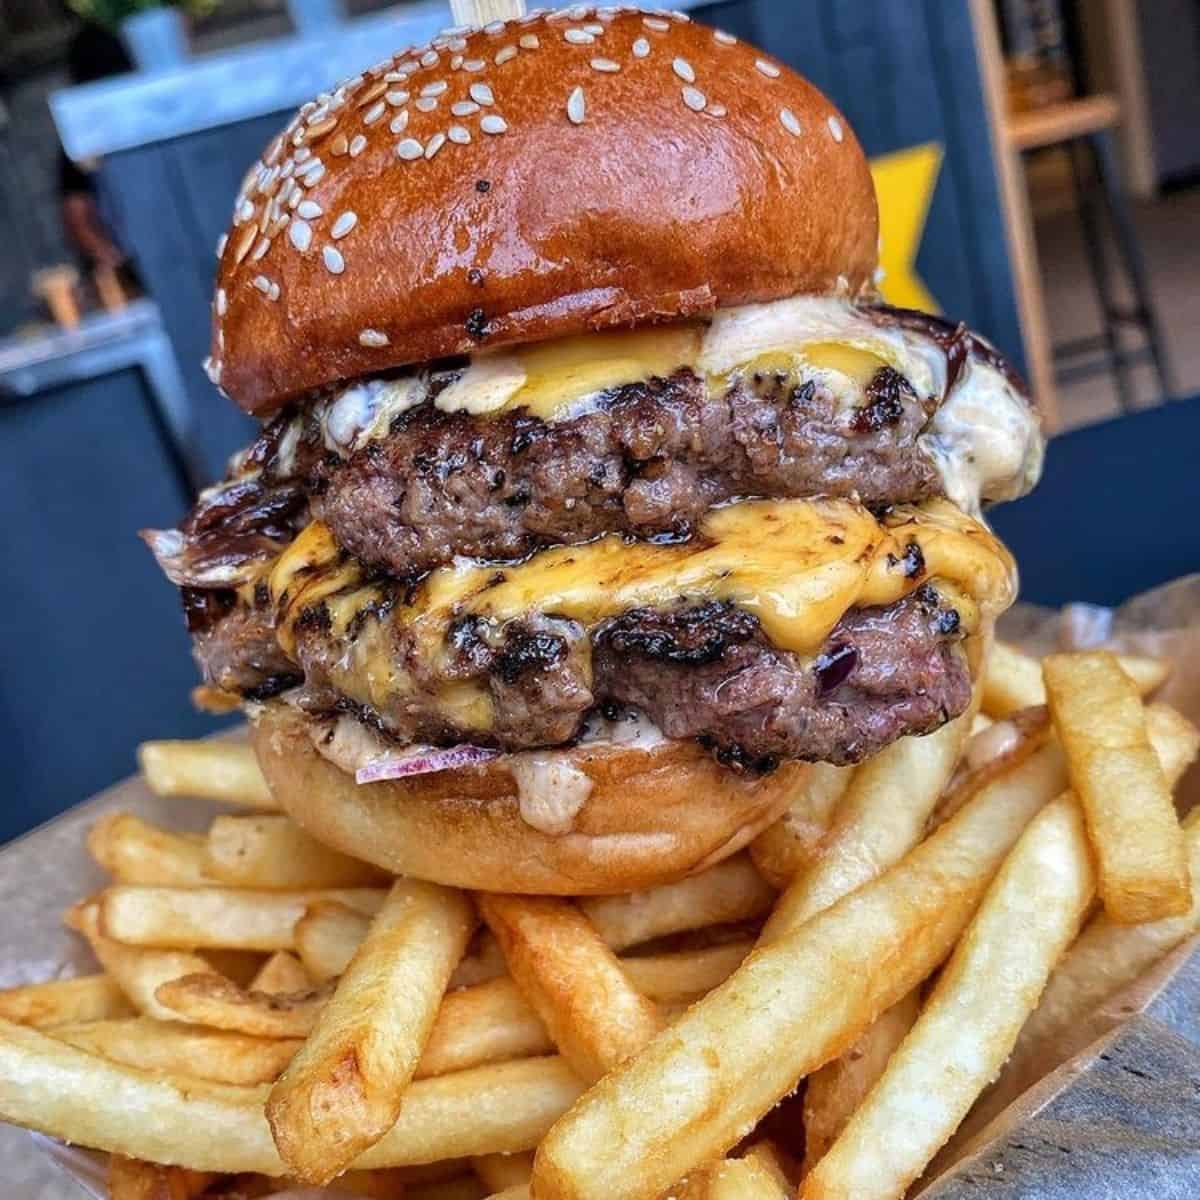 Double cheese burger on chips